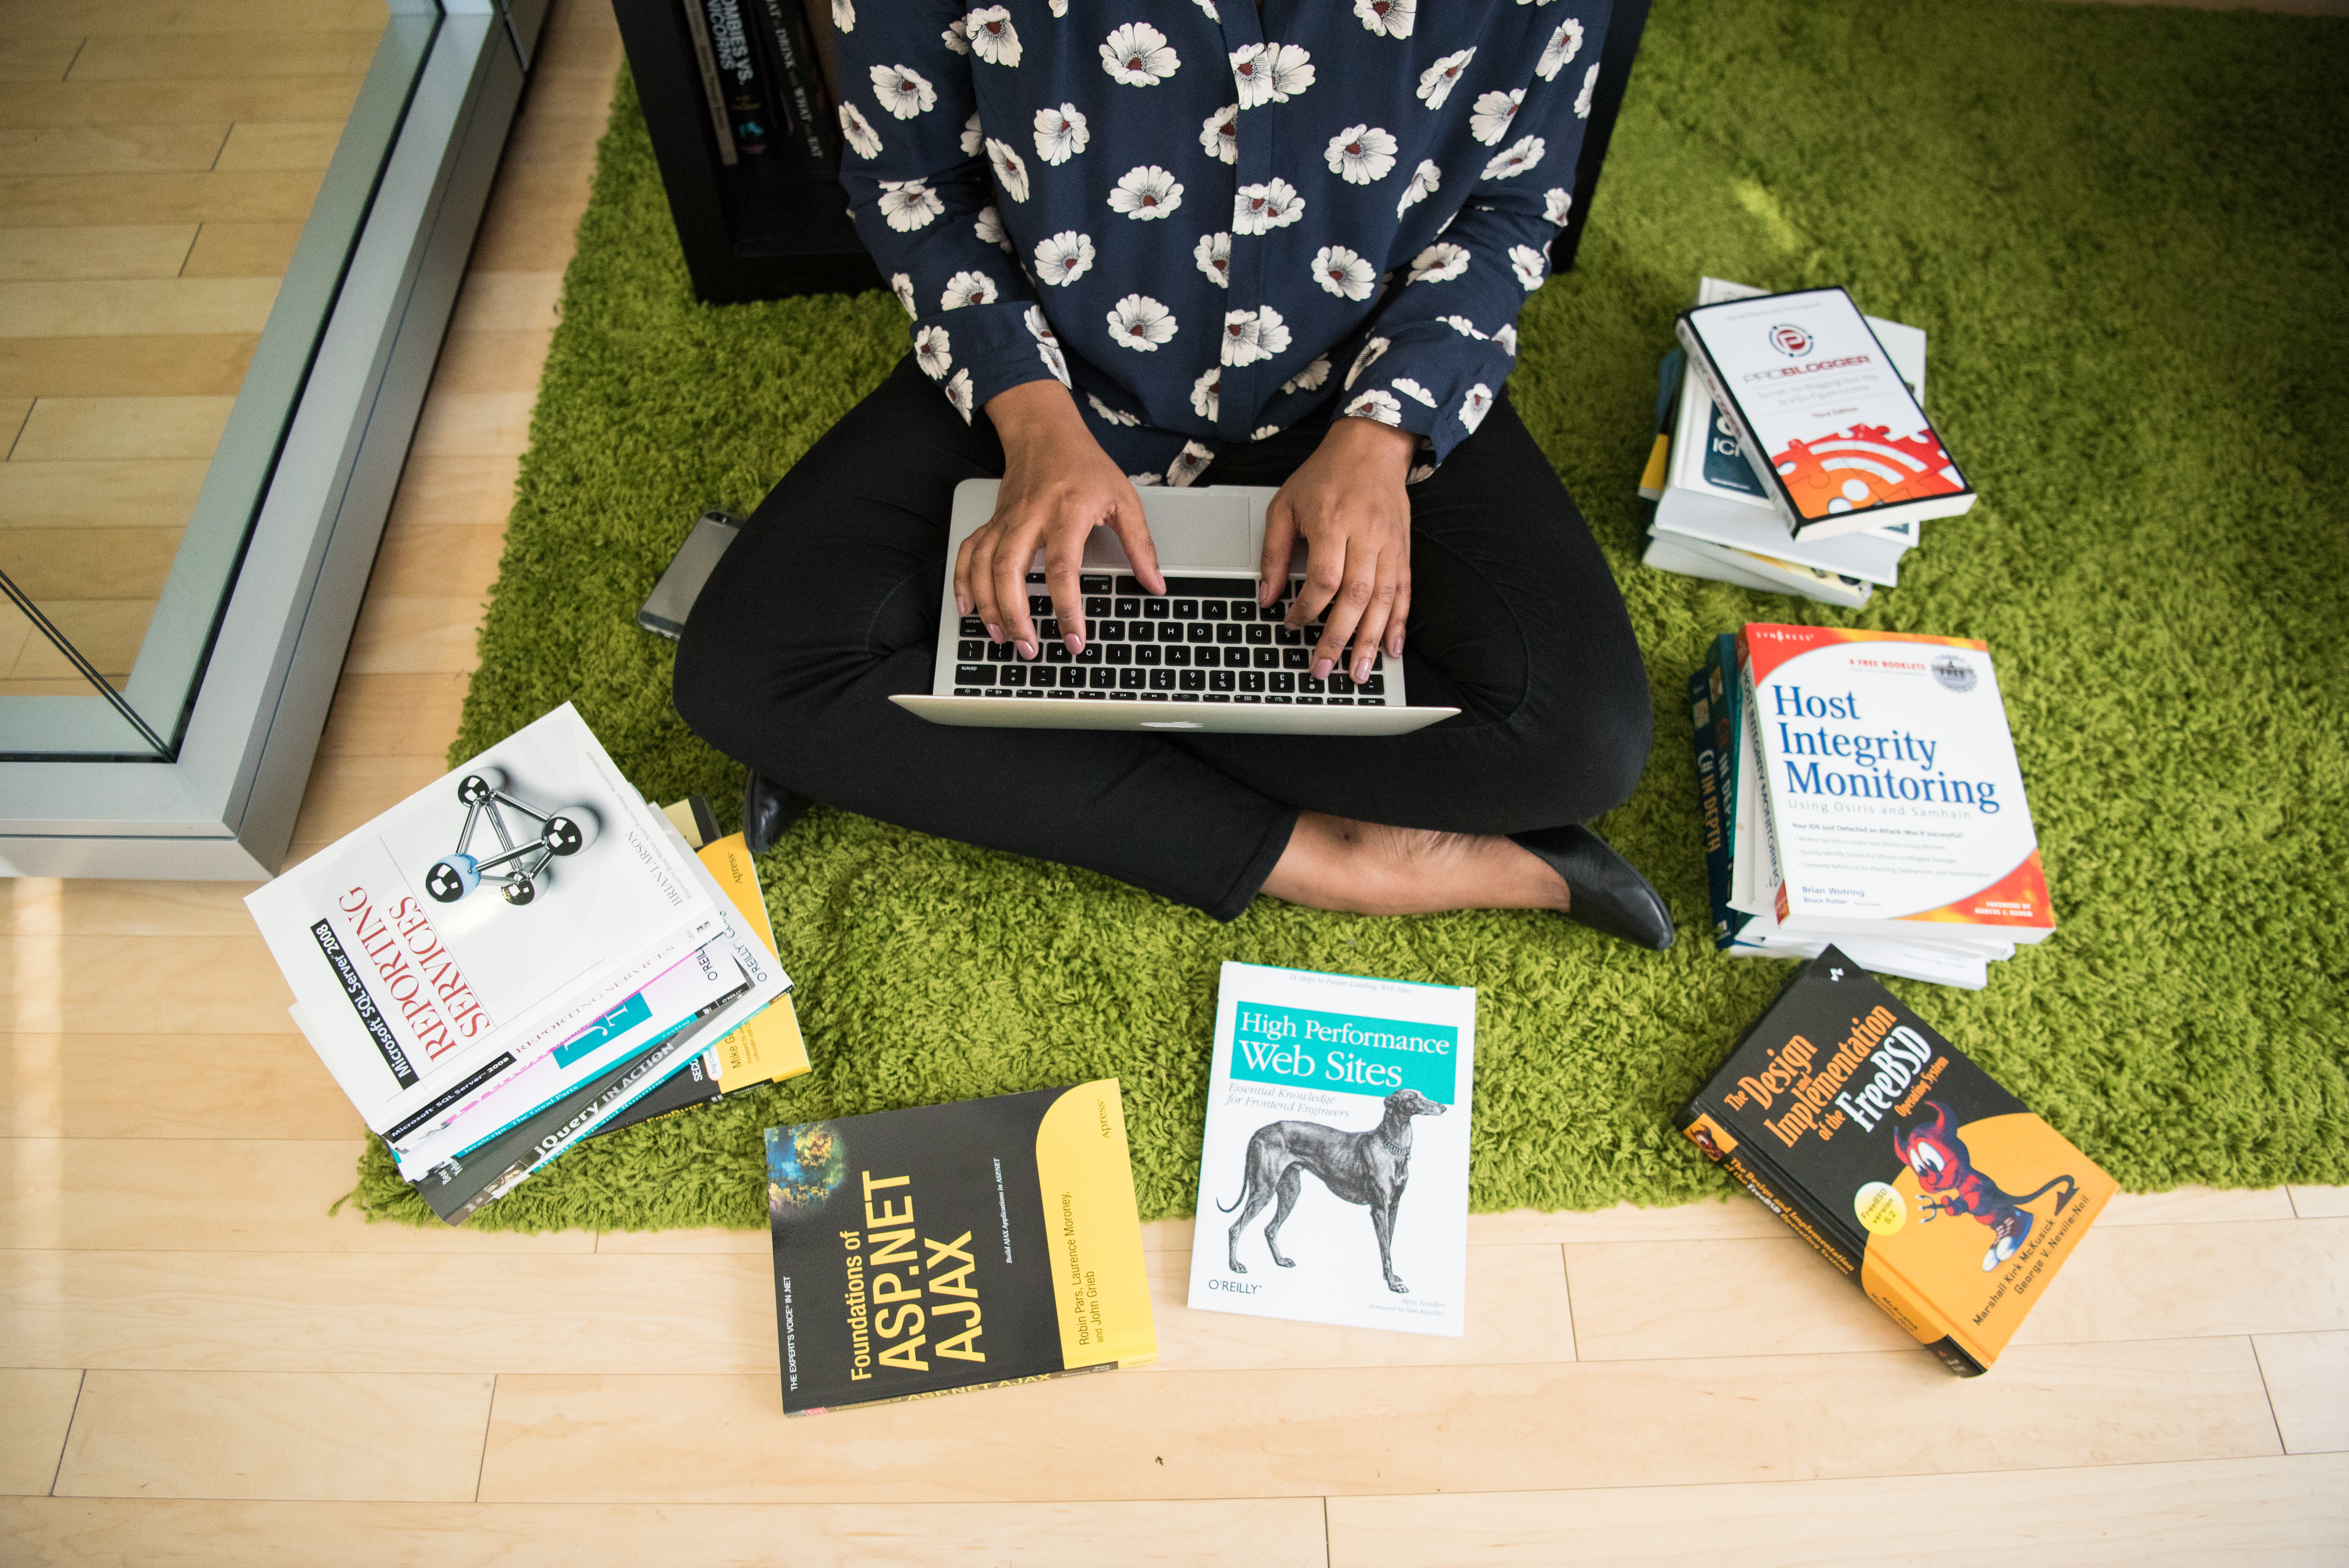 Woman types on laptop code books surround her photo by #WOCinTech Chat